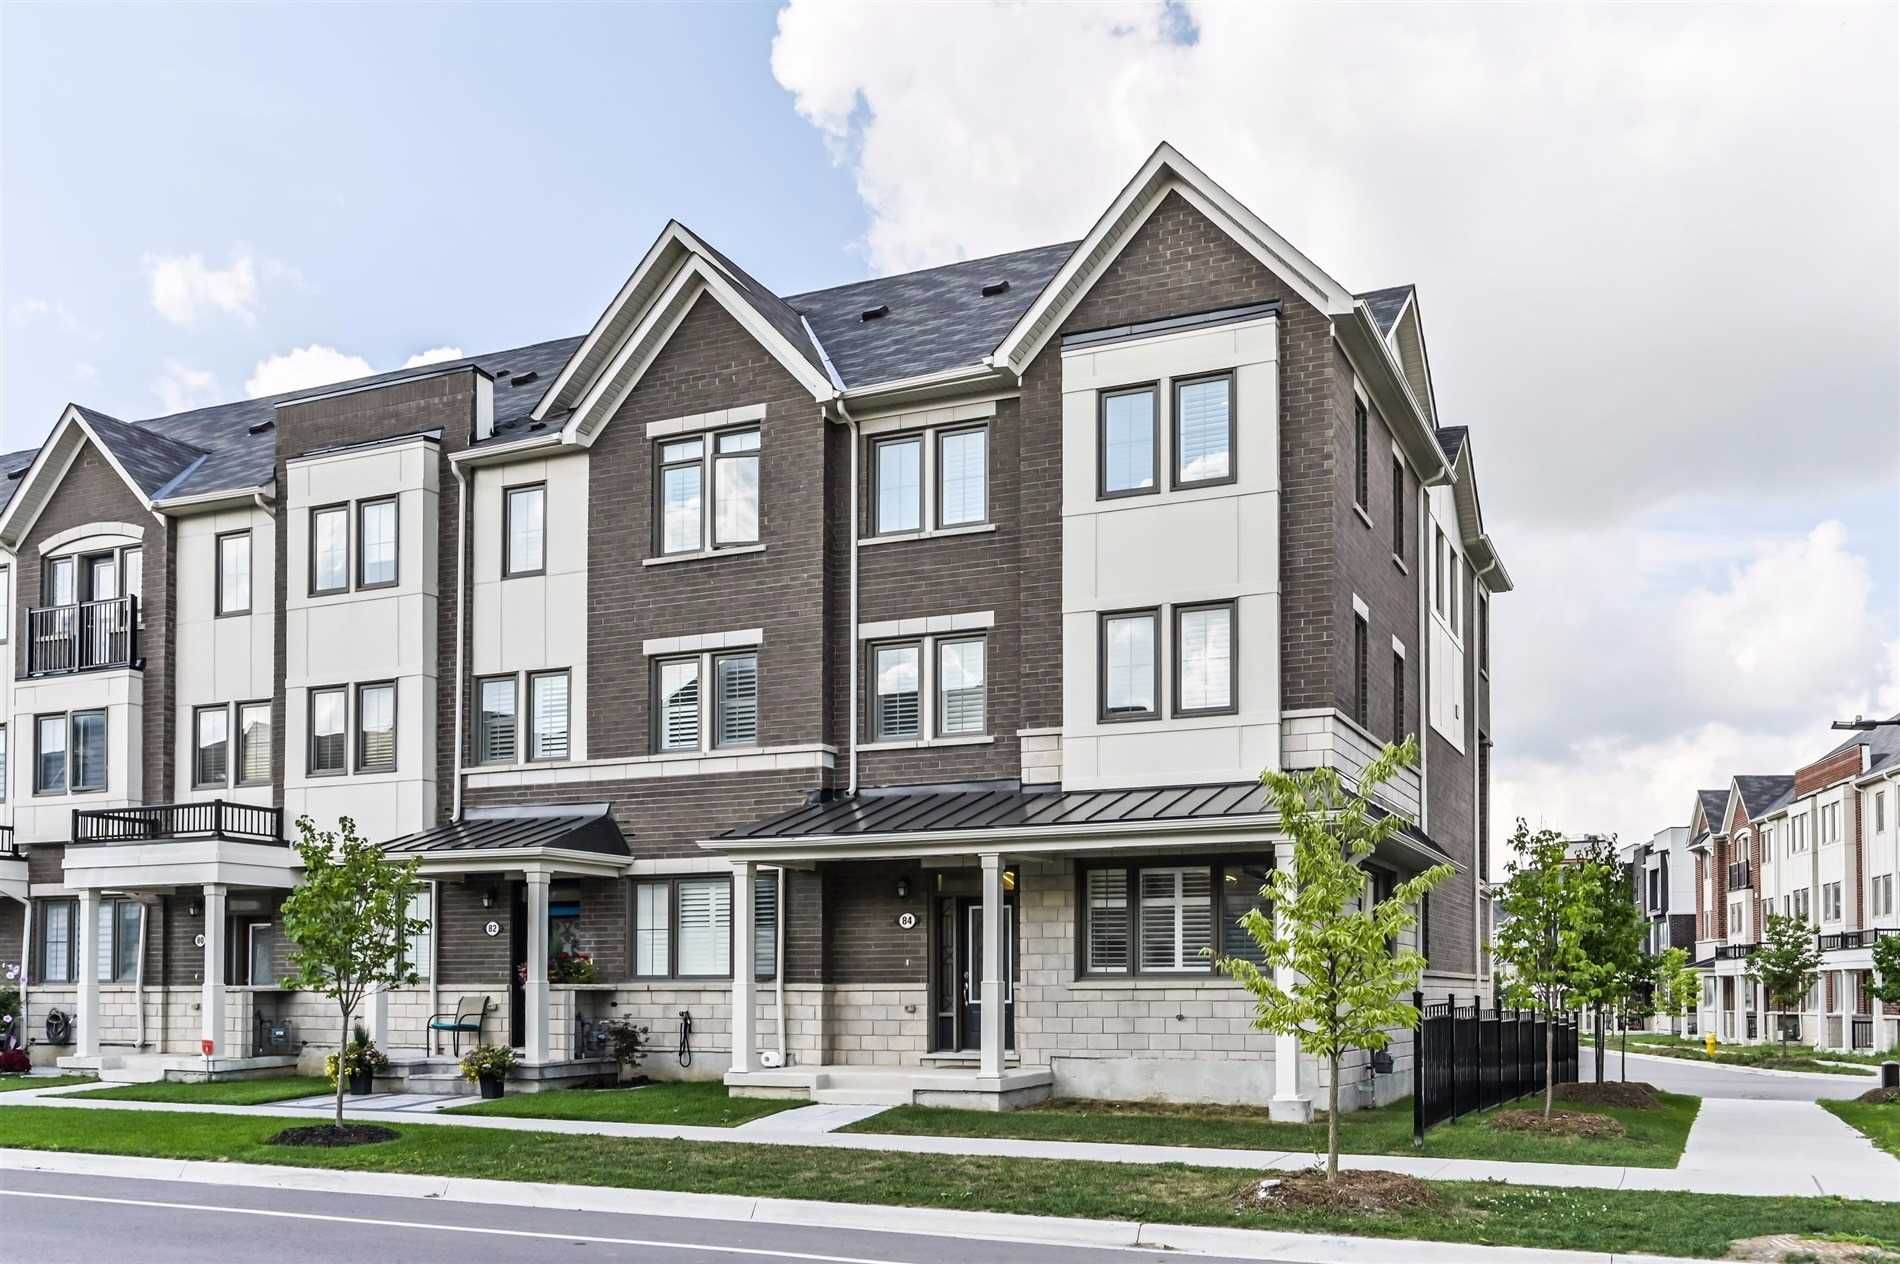 Main Photo: 84 Cornell Centre Blvd in Markham: Freehold for sale : MLS®# N4896458